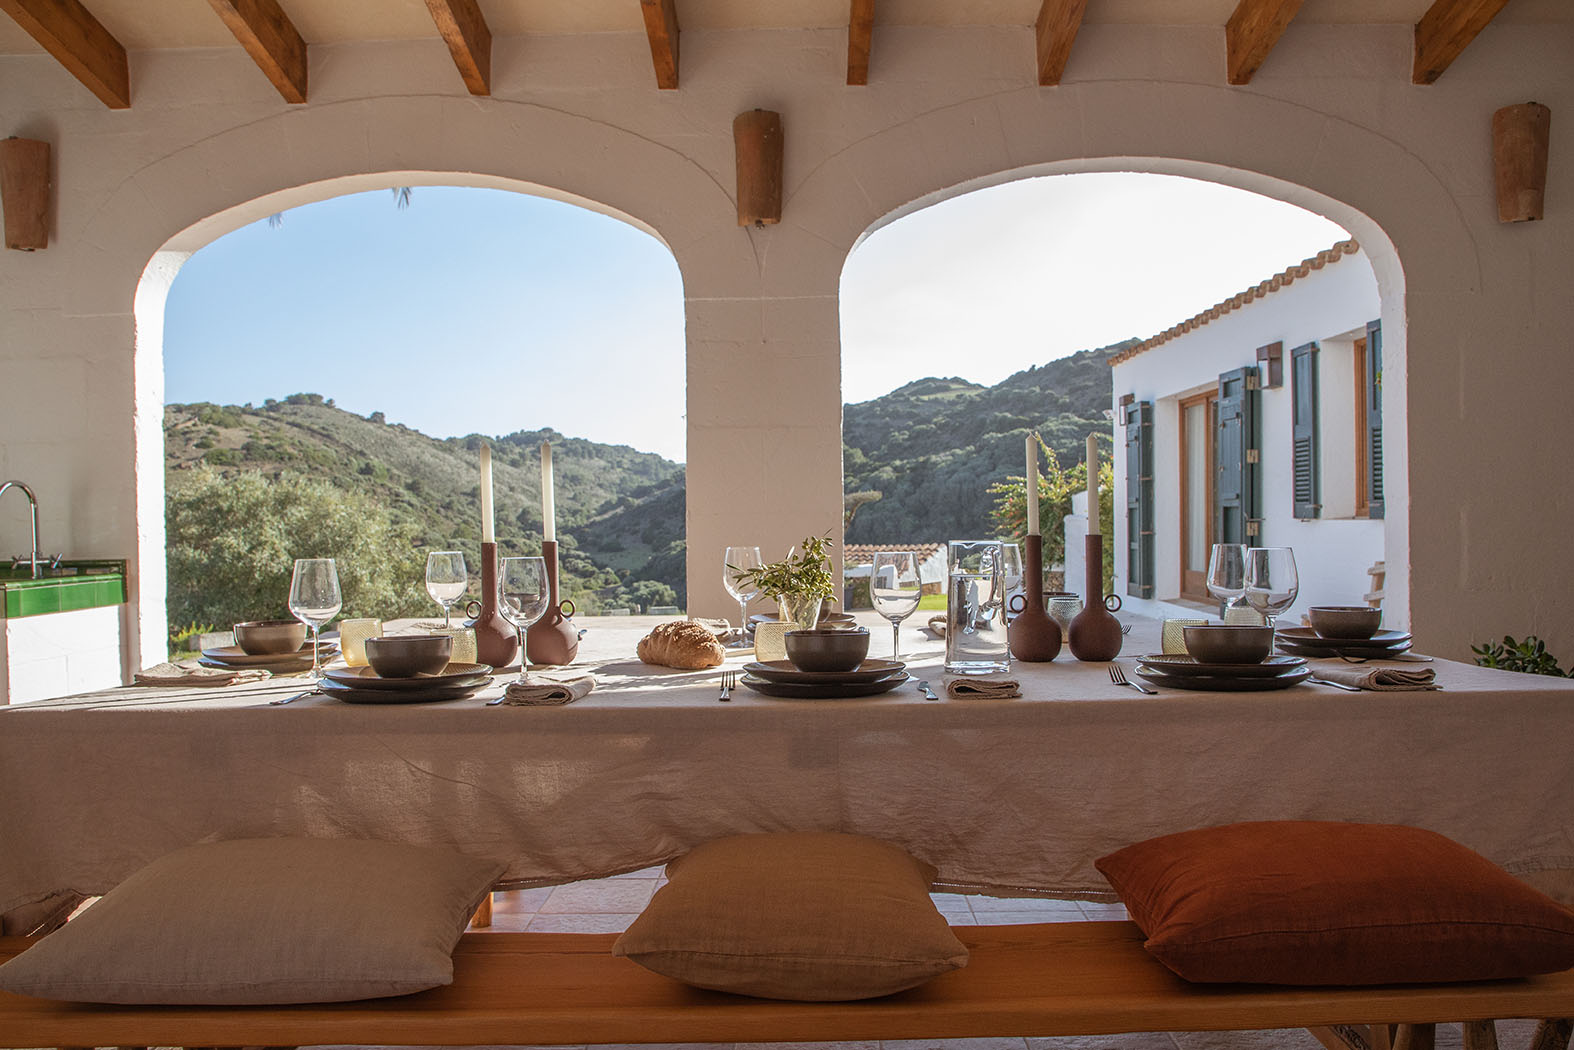 Discover an oasis of luxury and relaxation in the rustic northern reaches of Menorca at this elegant and secluded country house.